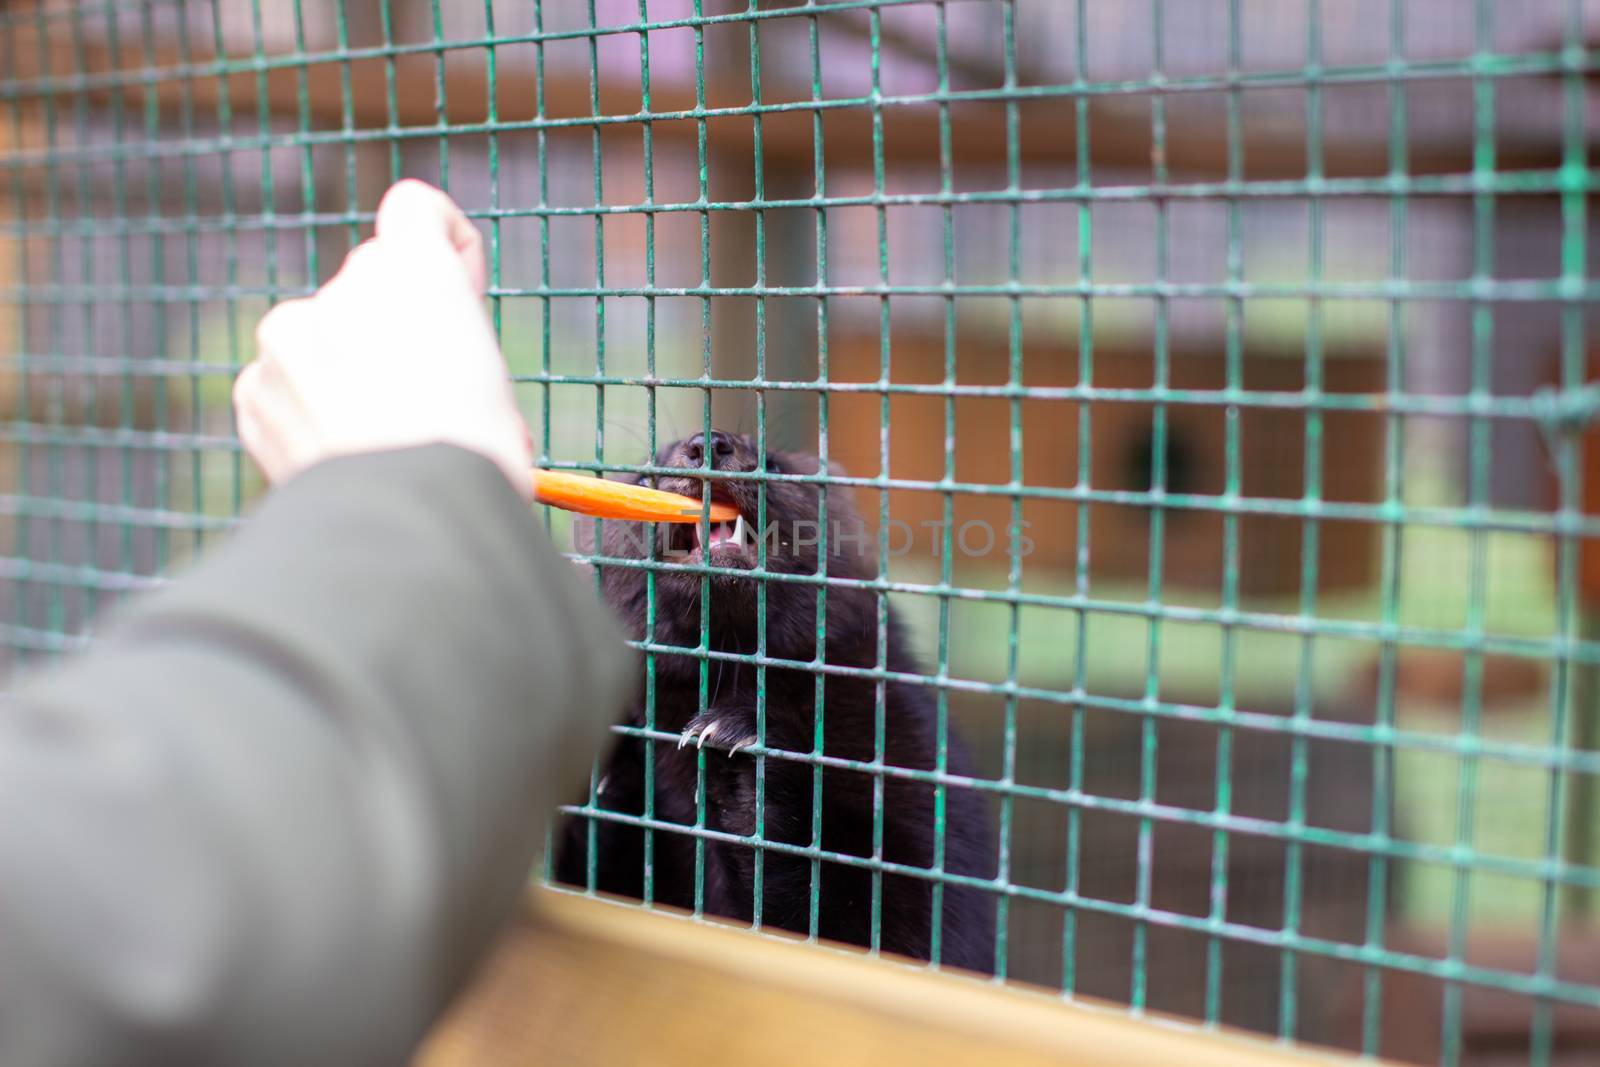 A man feeds a small animal European mink in a cage, through the bars, in the zoo.